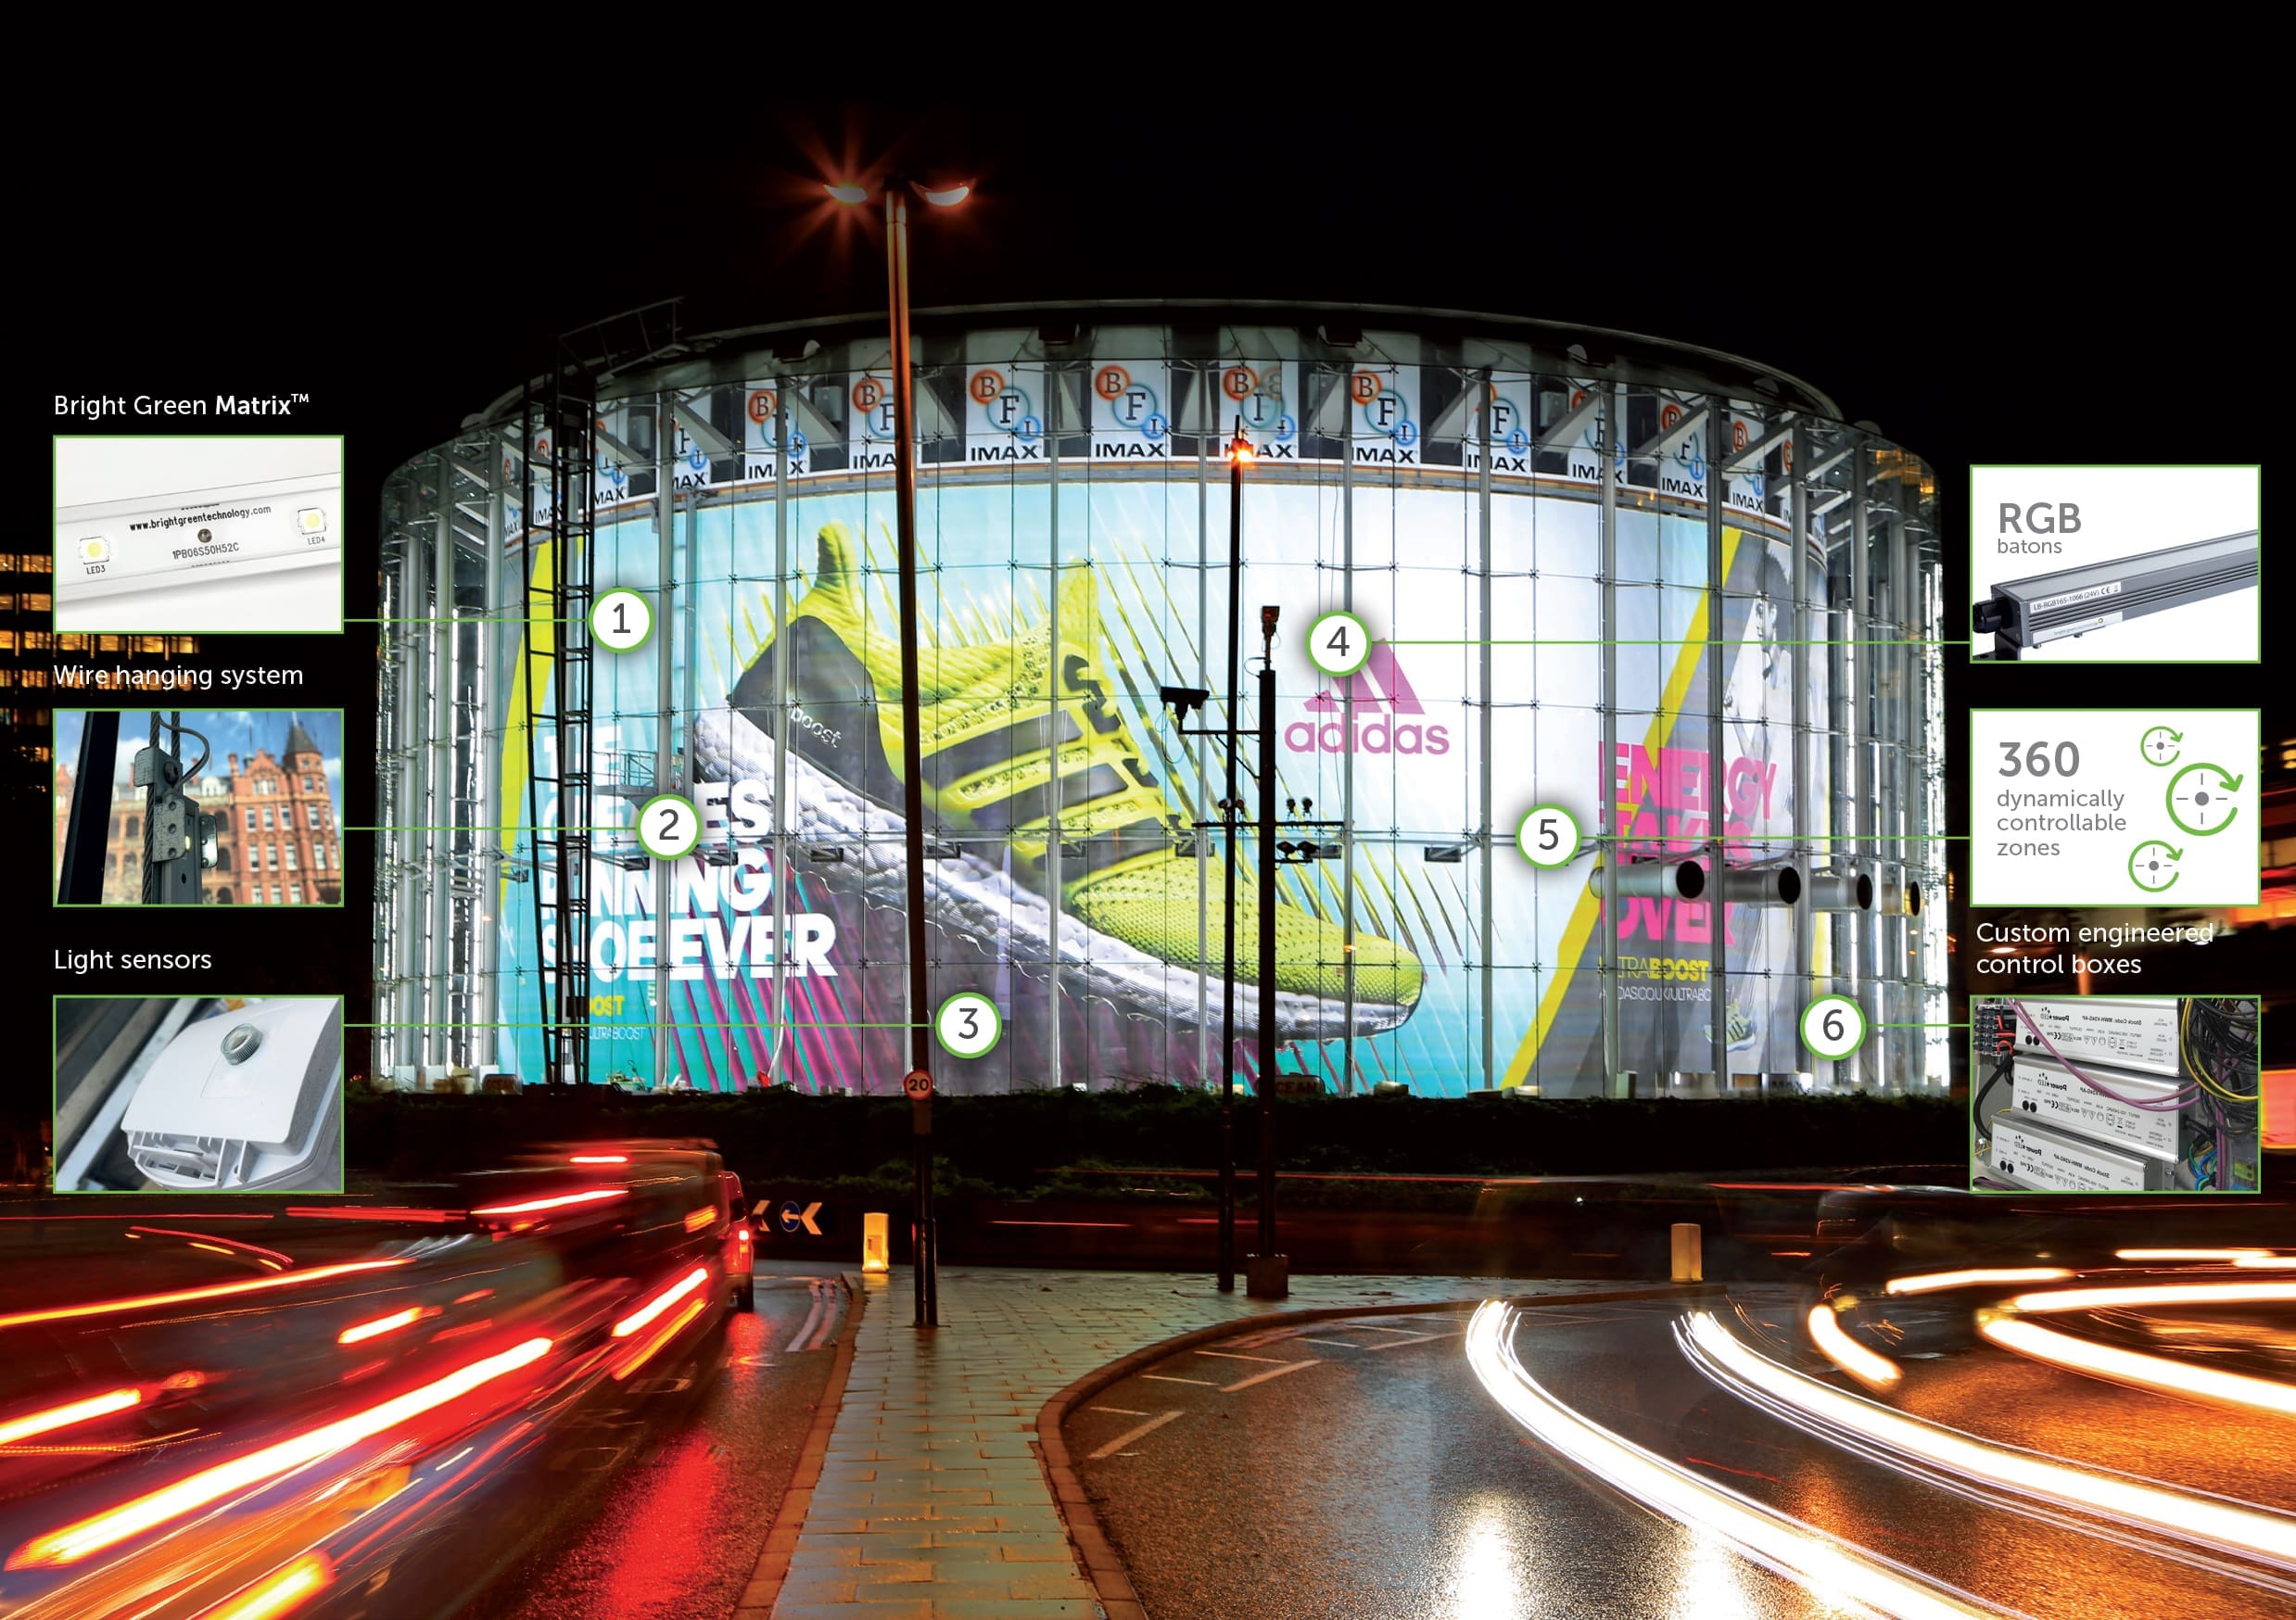 A large, circular building illuminated at night showcases an advertisement for Adidas using LED backlit graphics. The ad features a yellow and black Adidas running shoe with the tagline "Endless Energy Forever" on a vibrant, colorful background.